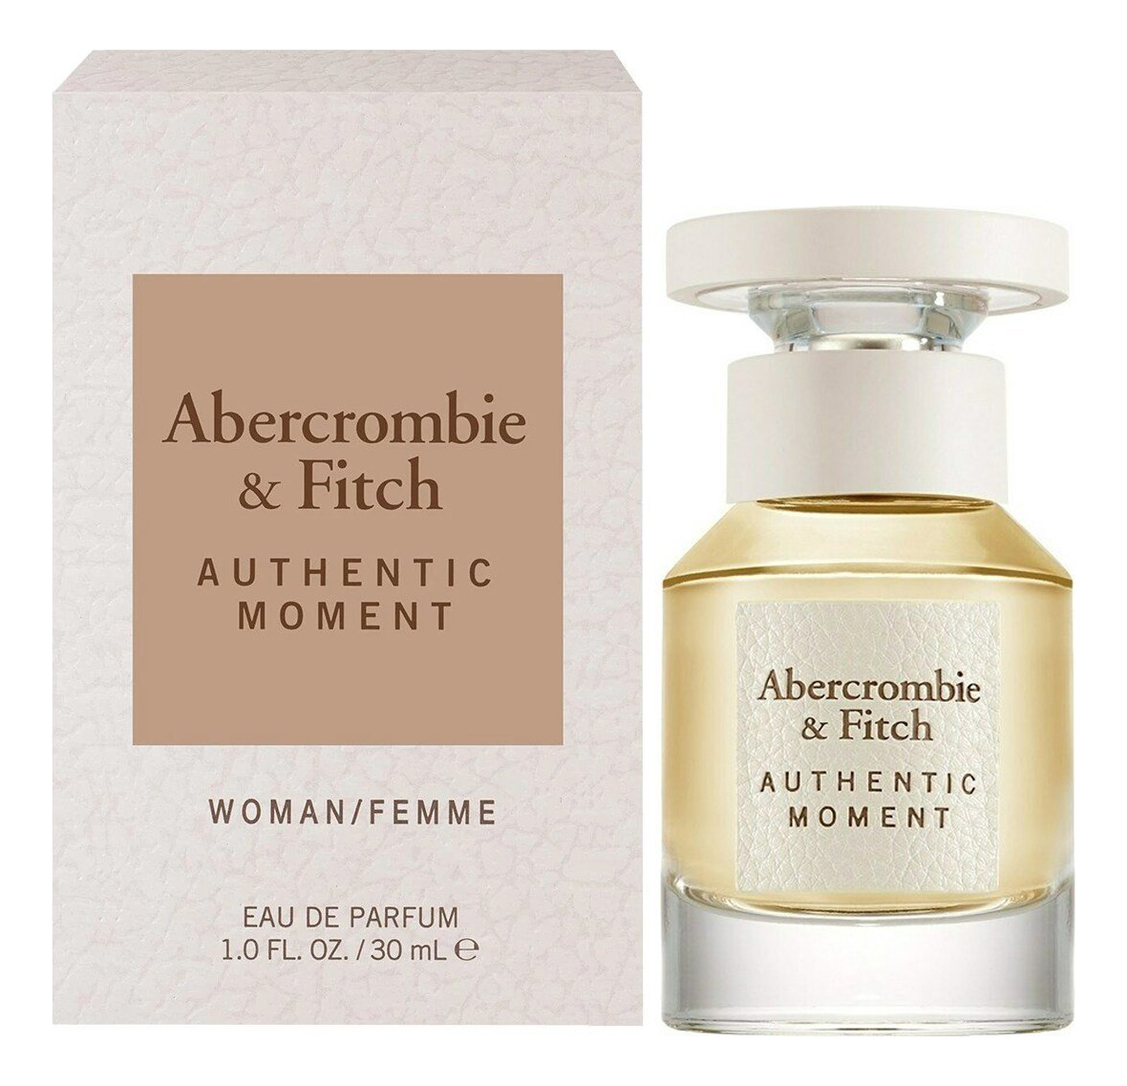 Abercrombie fitch authentic women парфюмерная вода. Духи Abercrombie Fitch authentic moment. Духи Abercrombie Fitch authentic 30 мл. Духи Abercrombie Fitch authentic women. Abercrombie Fitch authentic moment women.